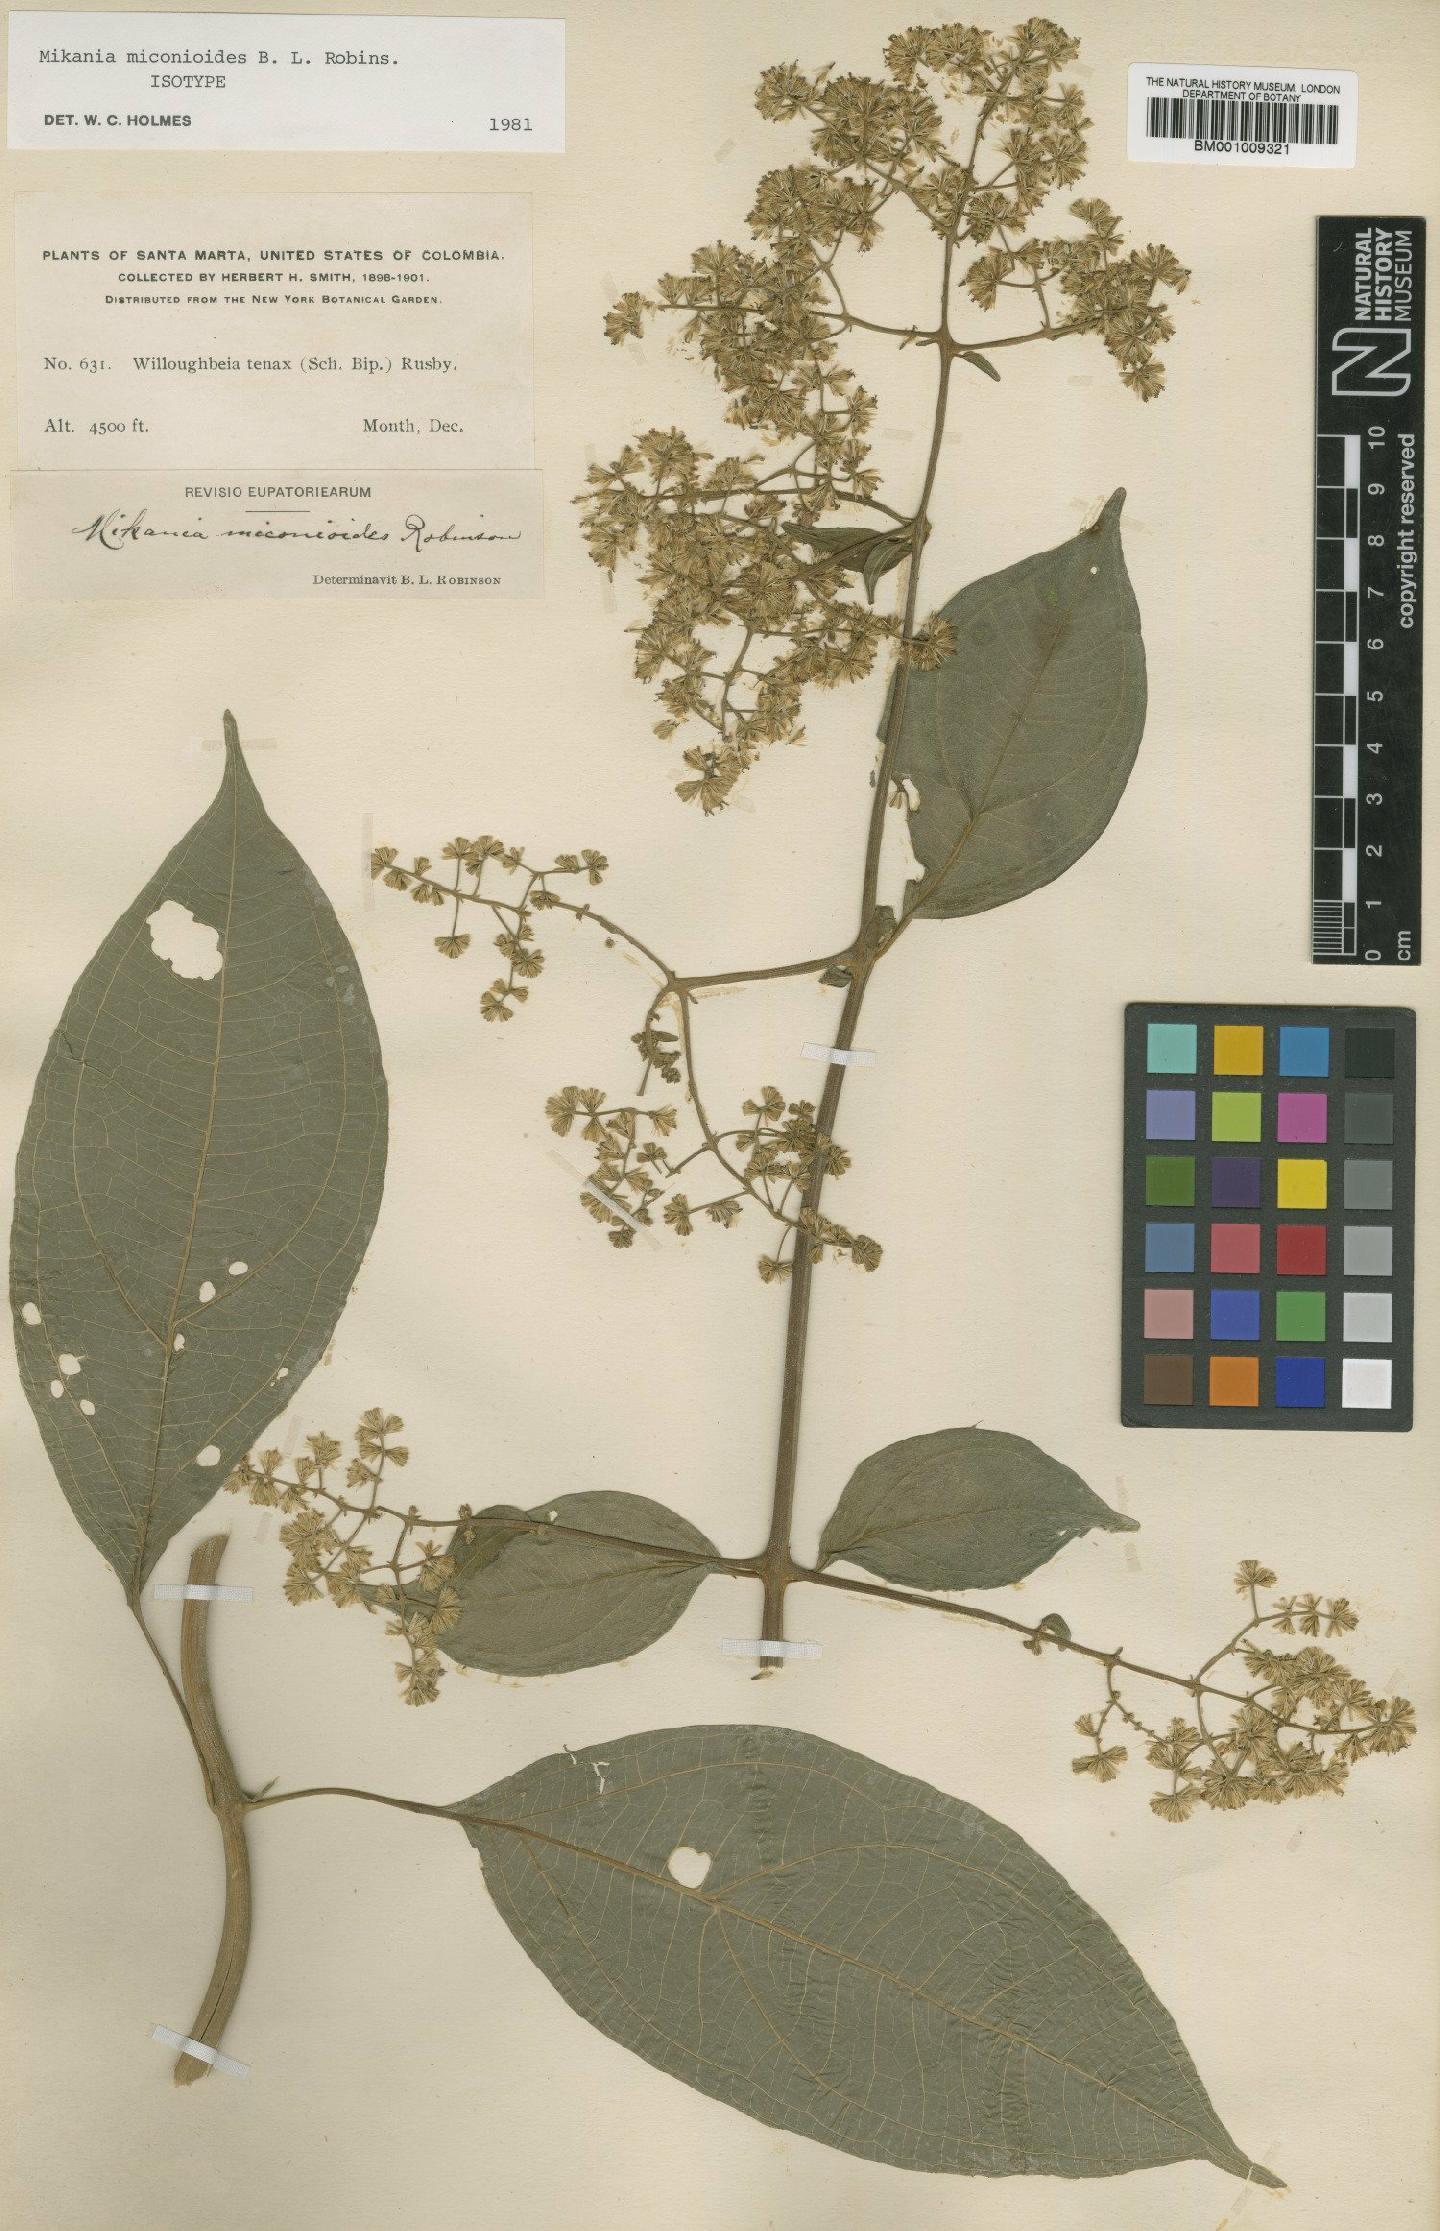 To NHMUK collection (Mikania miconioides B.L.Rob.; Isotype; NHMUK:ecatalogue:571976)